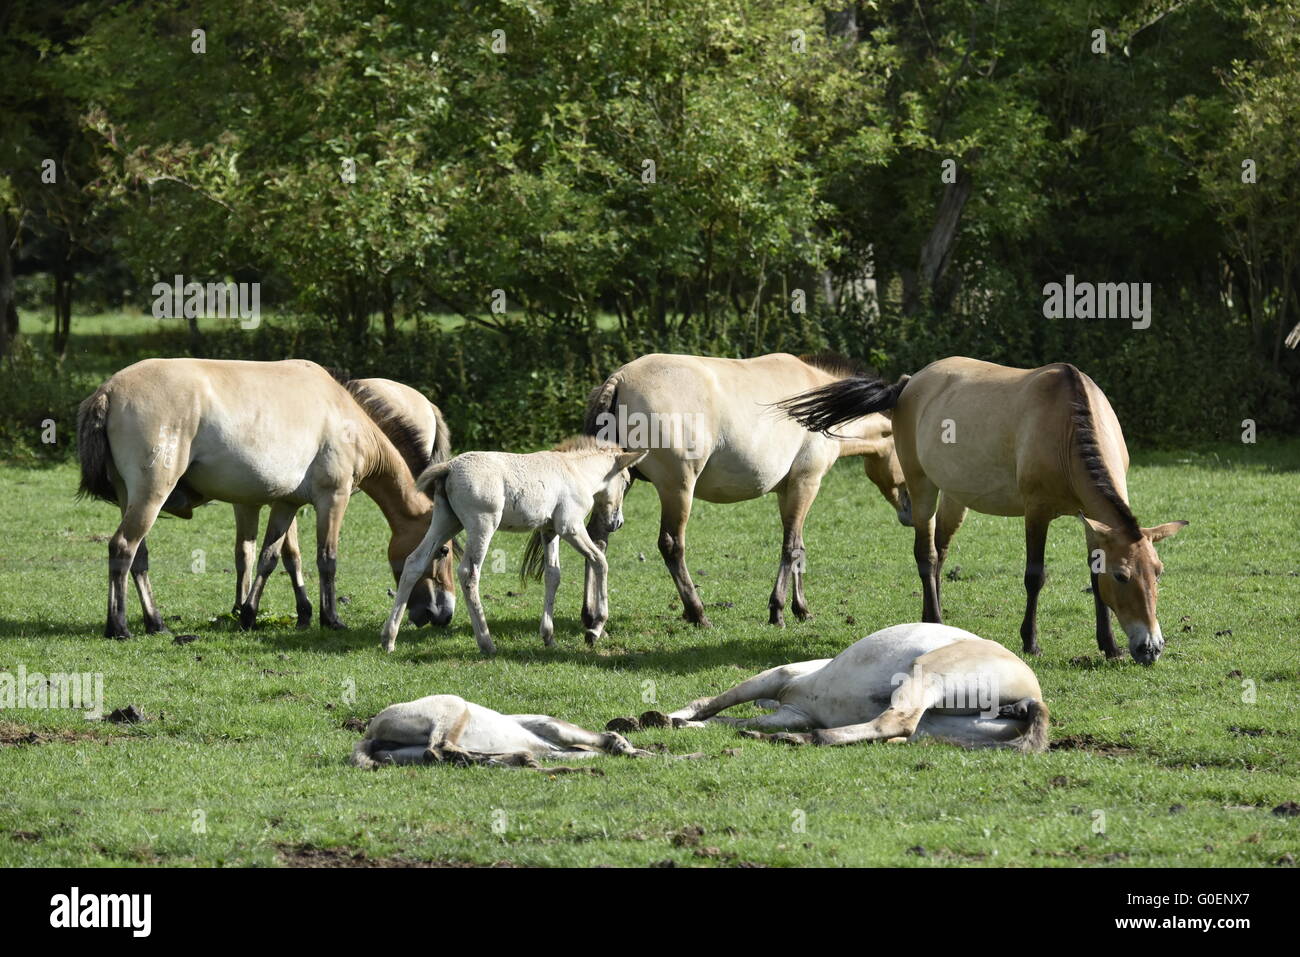 The Przewalski's horse with Foals Stock Photo